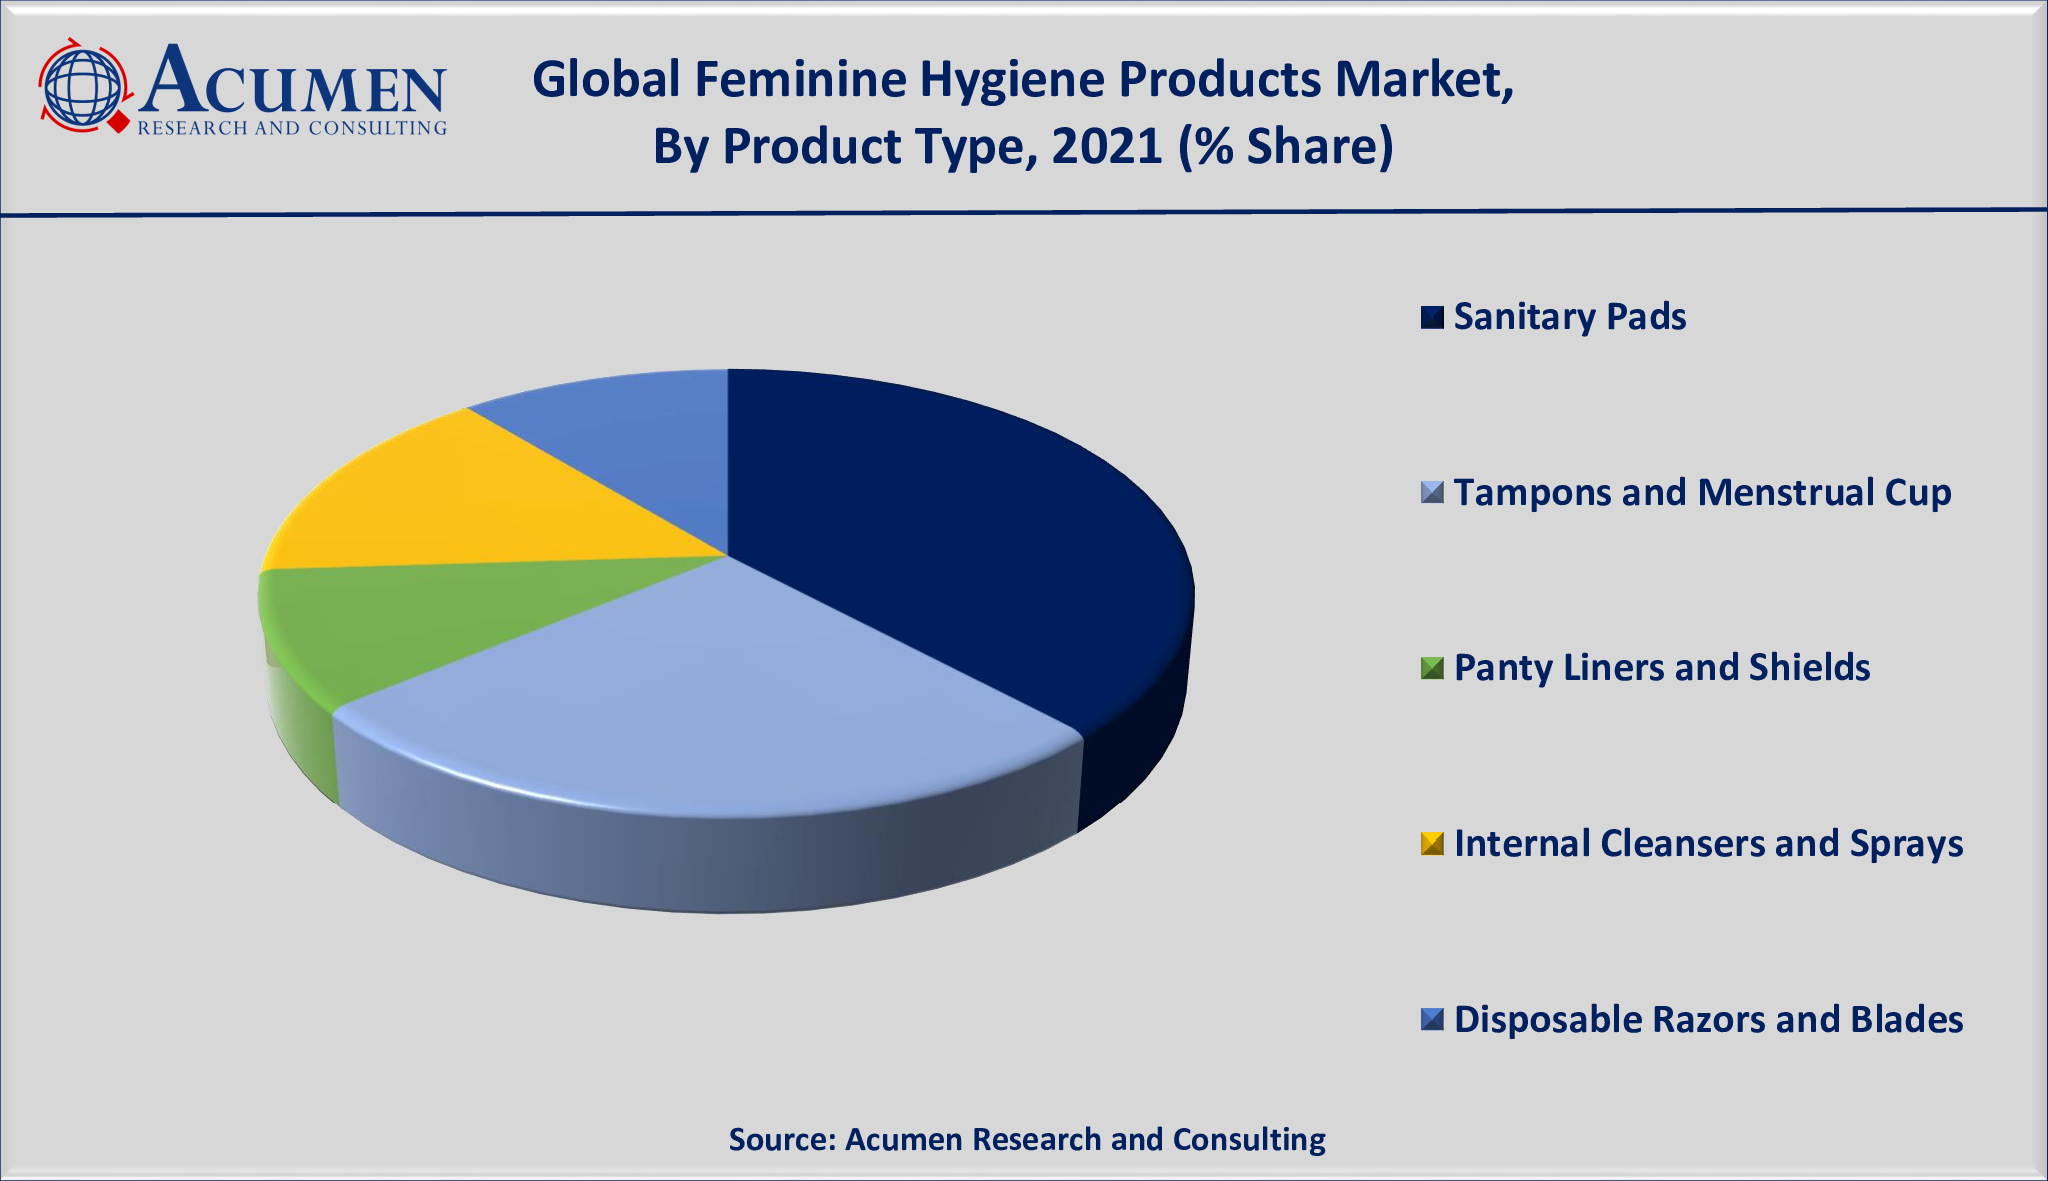 Laboratoires Expanscience sees opportunities in Asia's intimate feminine  care market